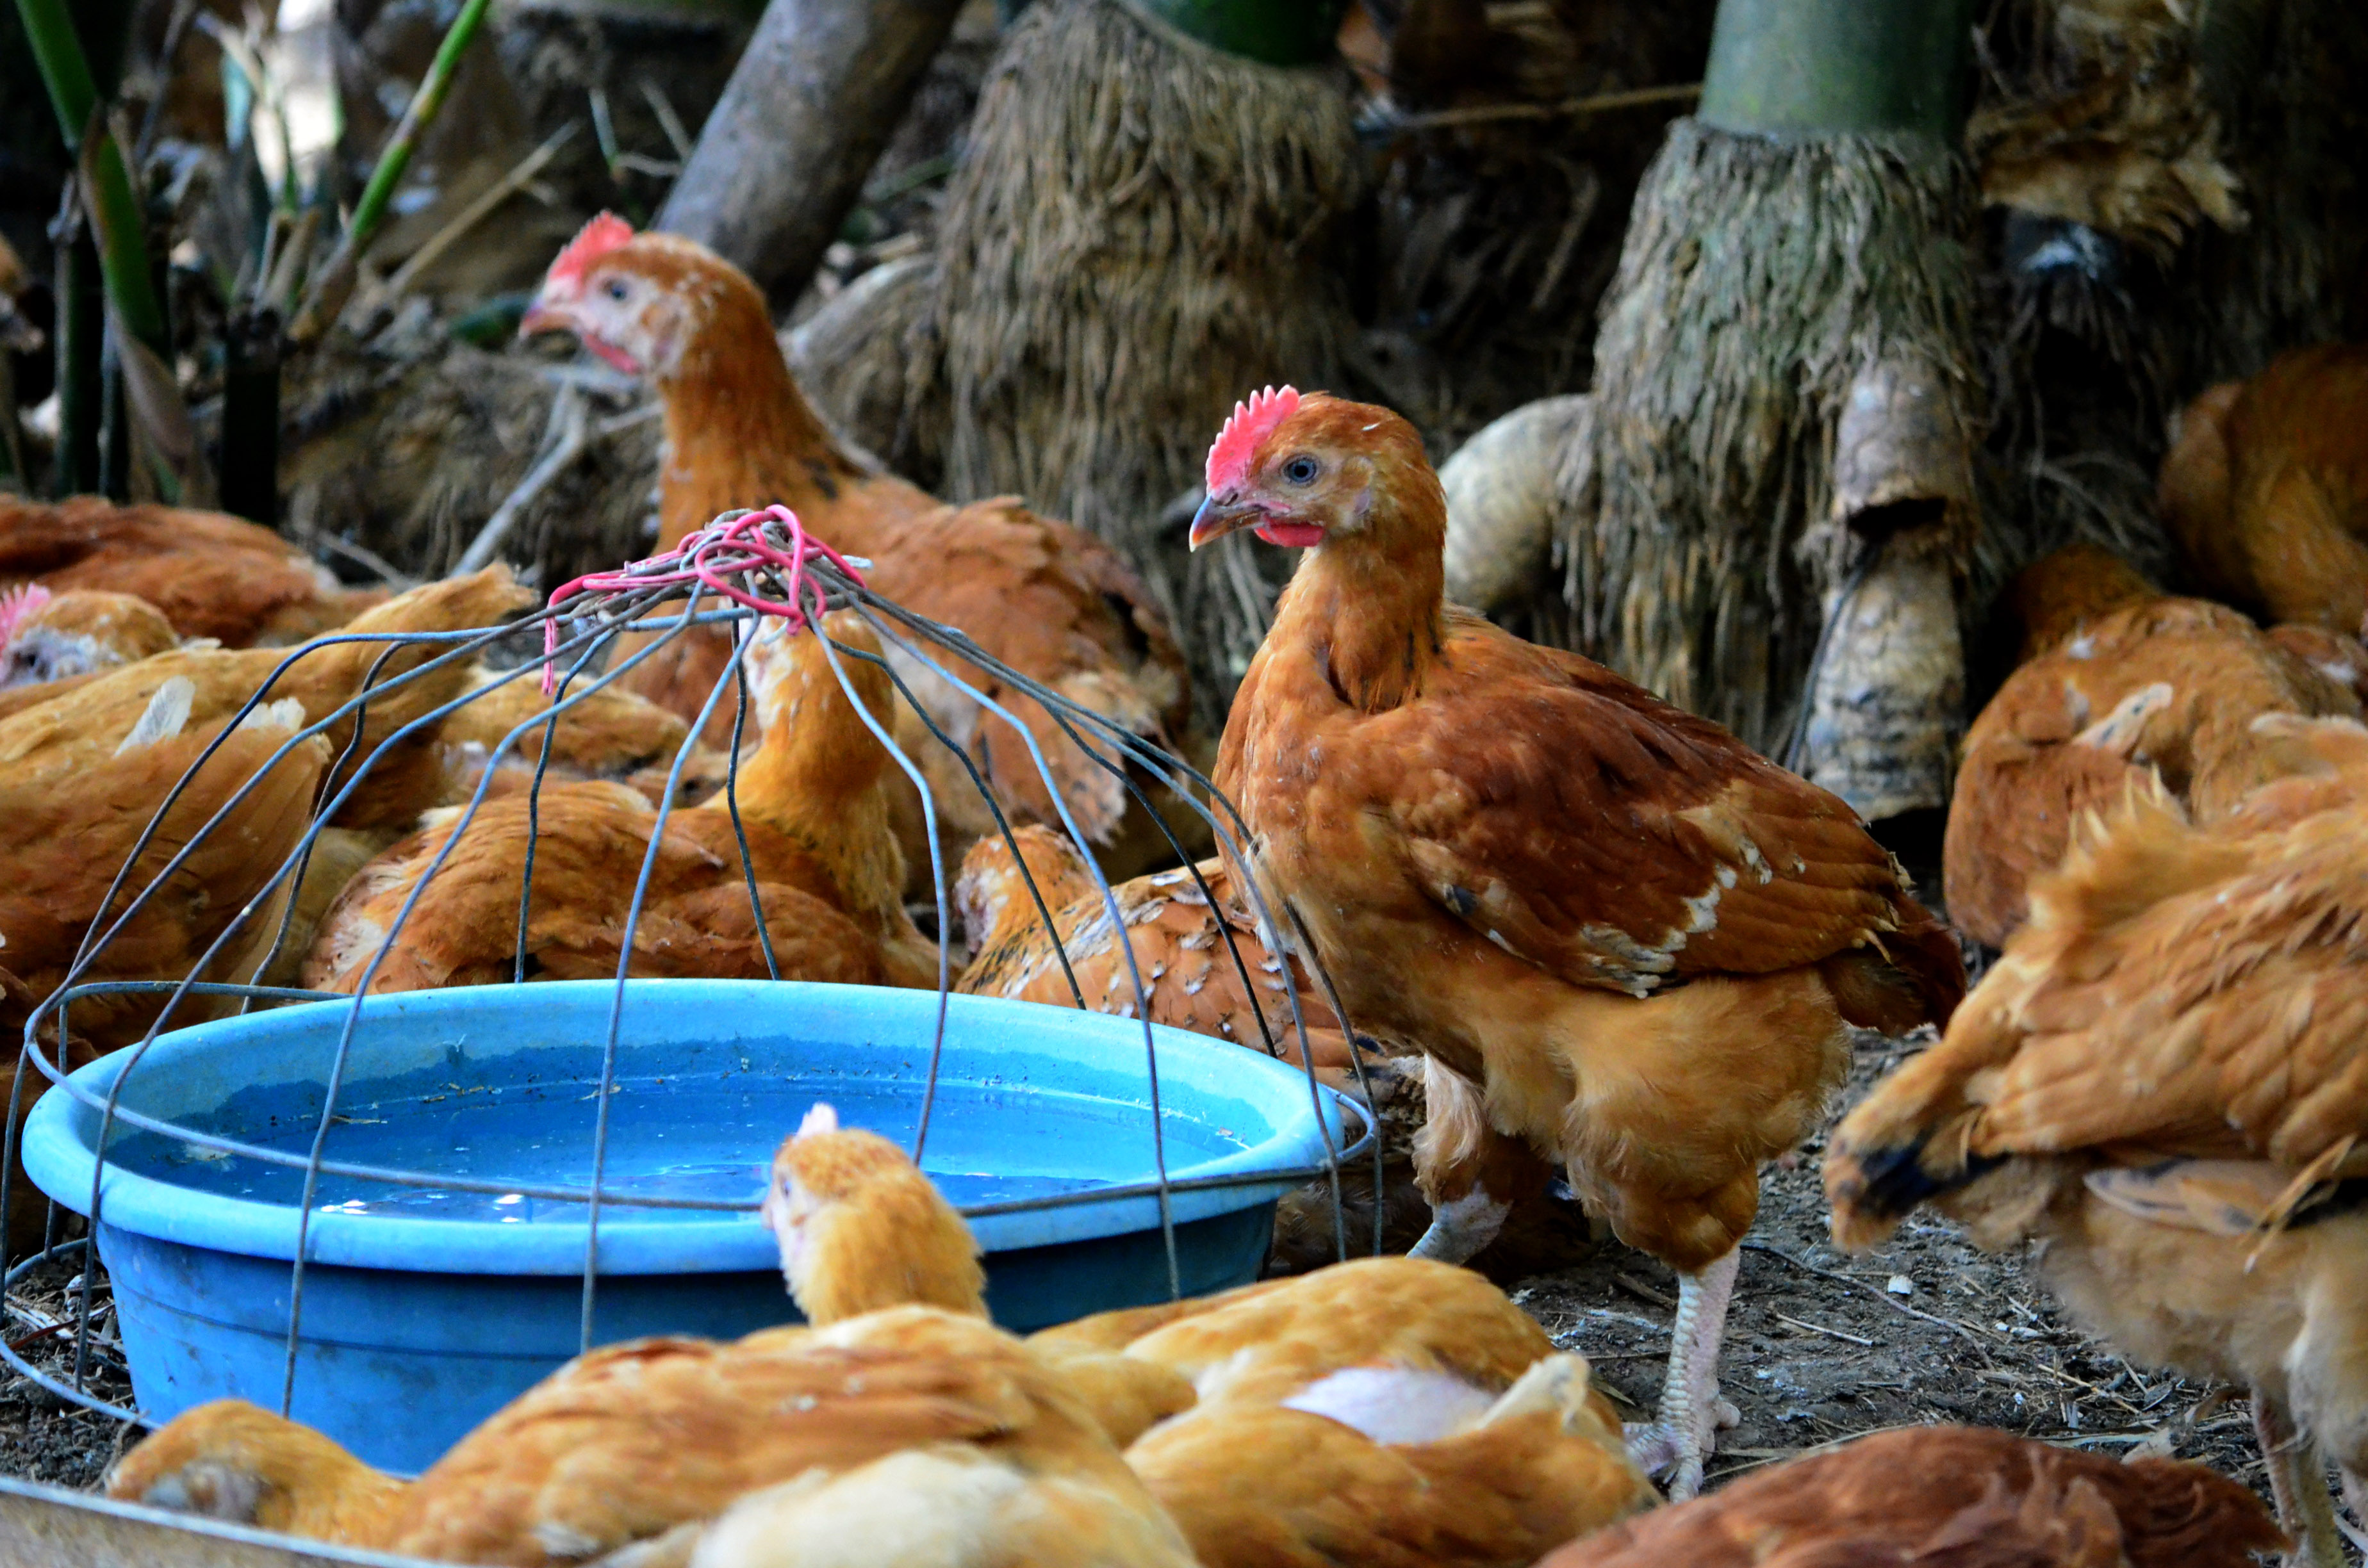 Farming heritage chicken breeds of the Philippines | The Poultry Site